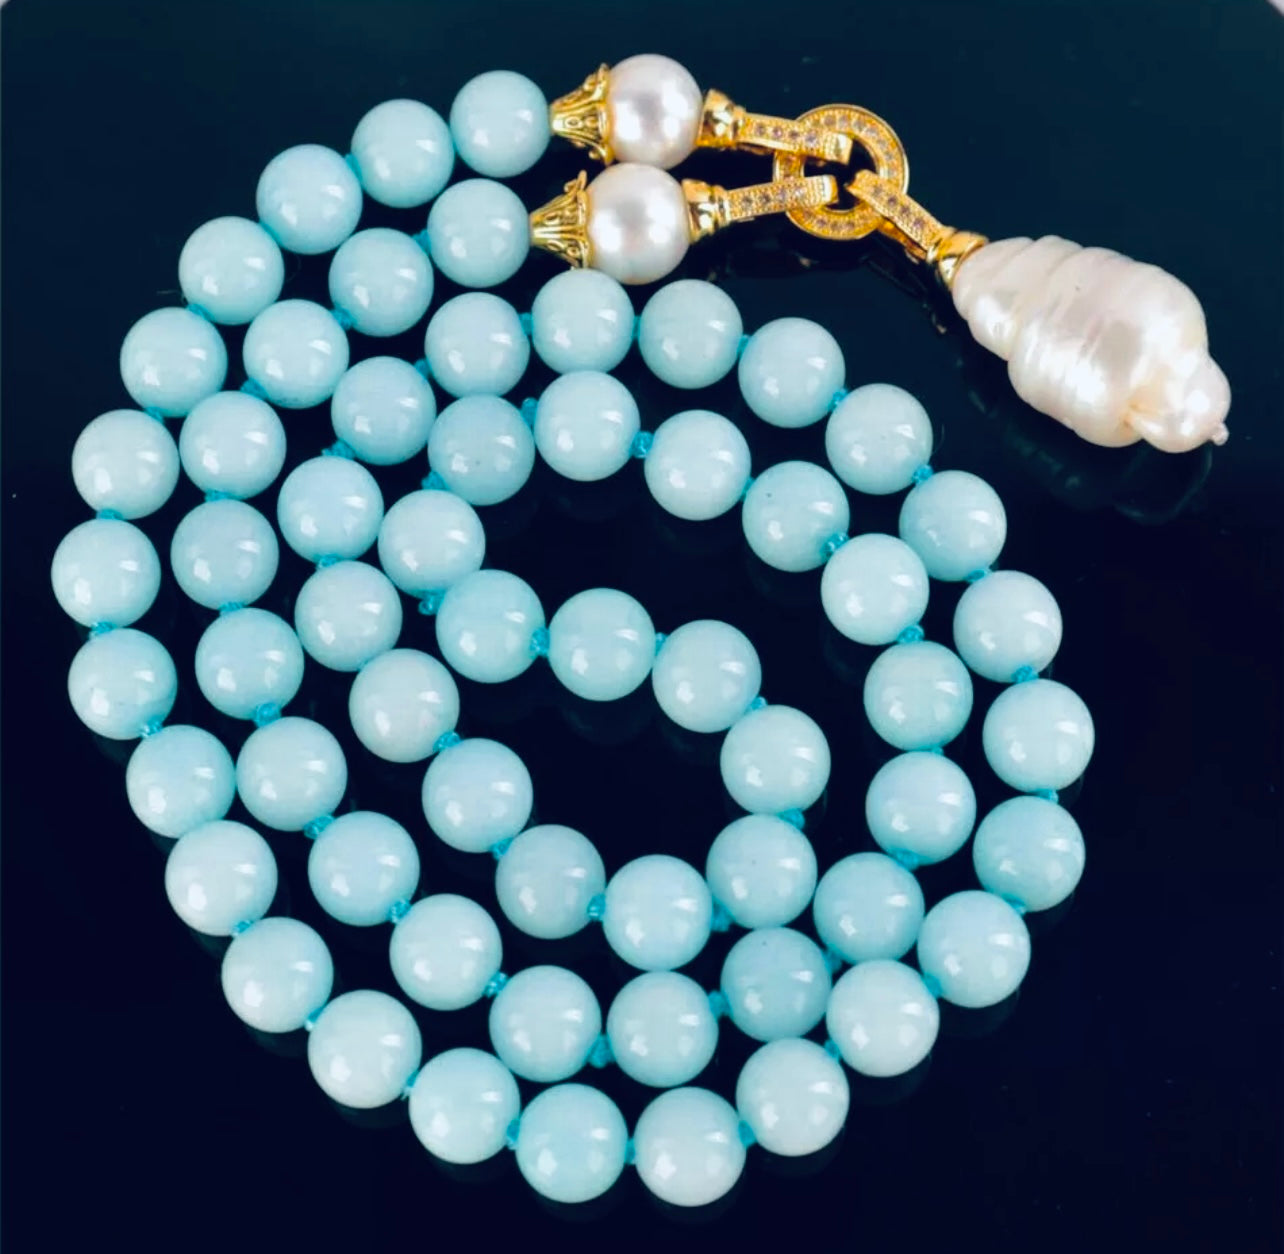 Rare Keshi Pearl Drop & Aquamarine Gemstone Double-Knotted Statement Necklace 18"